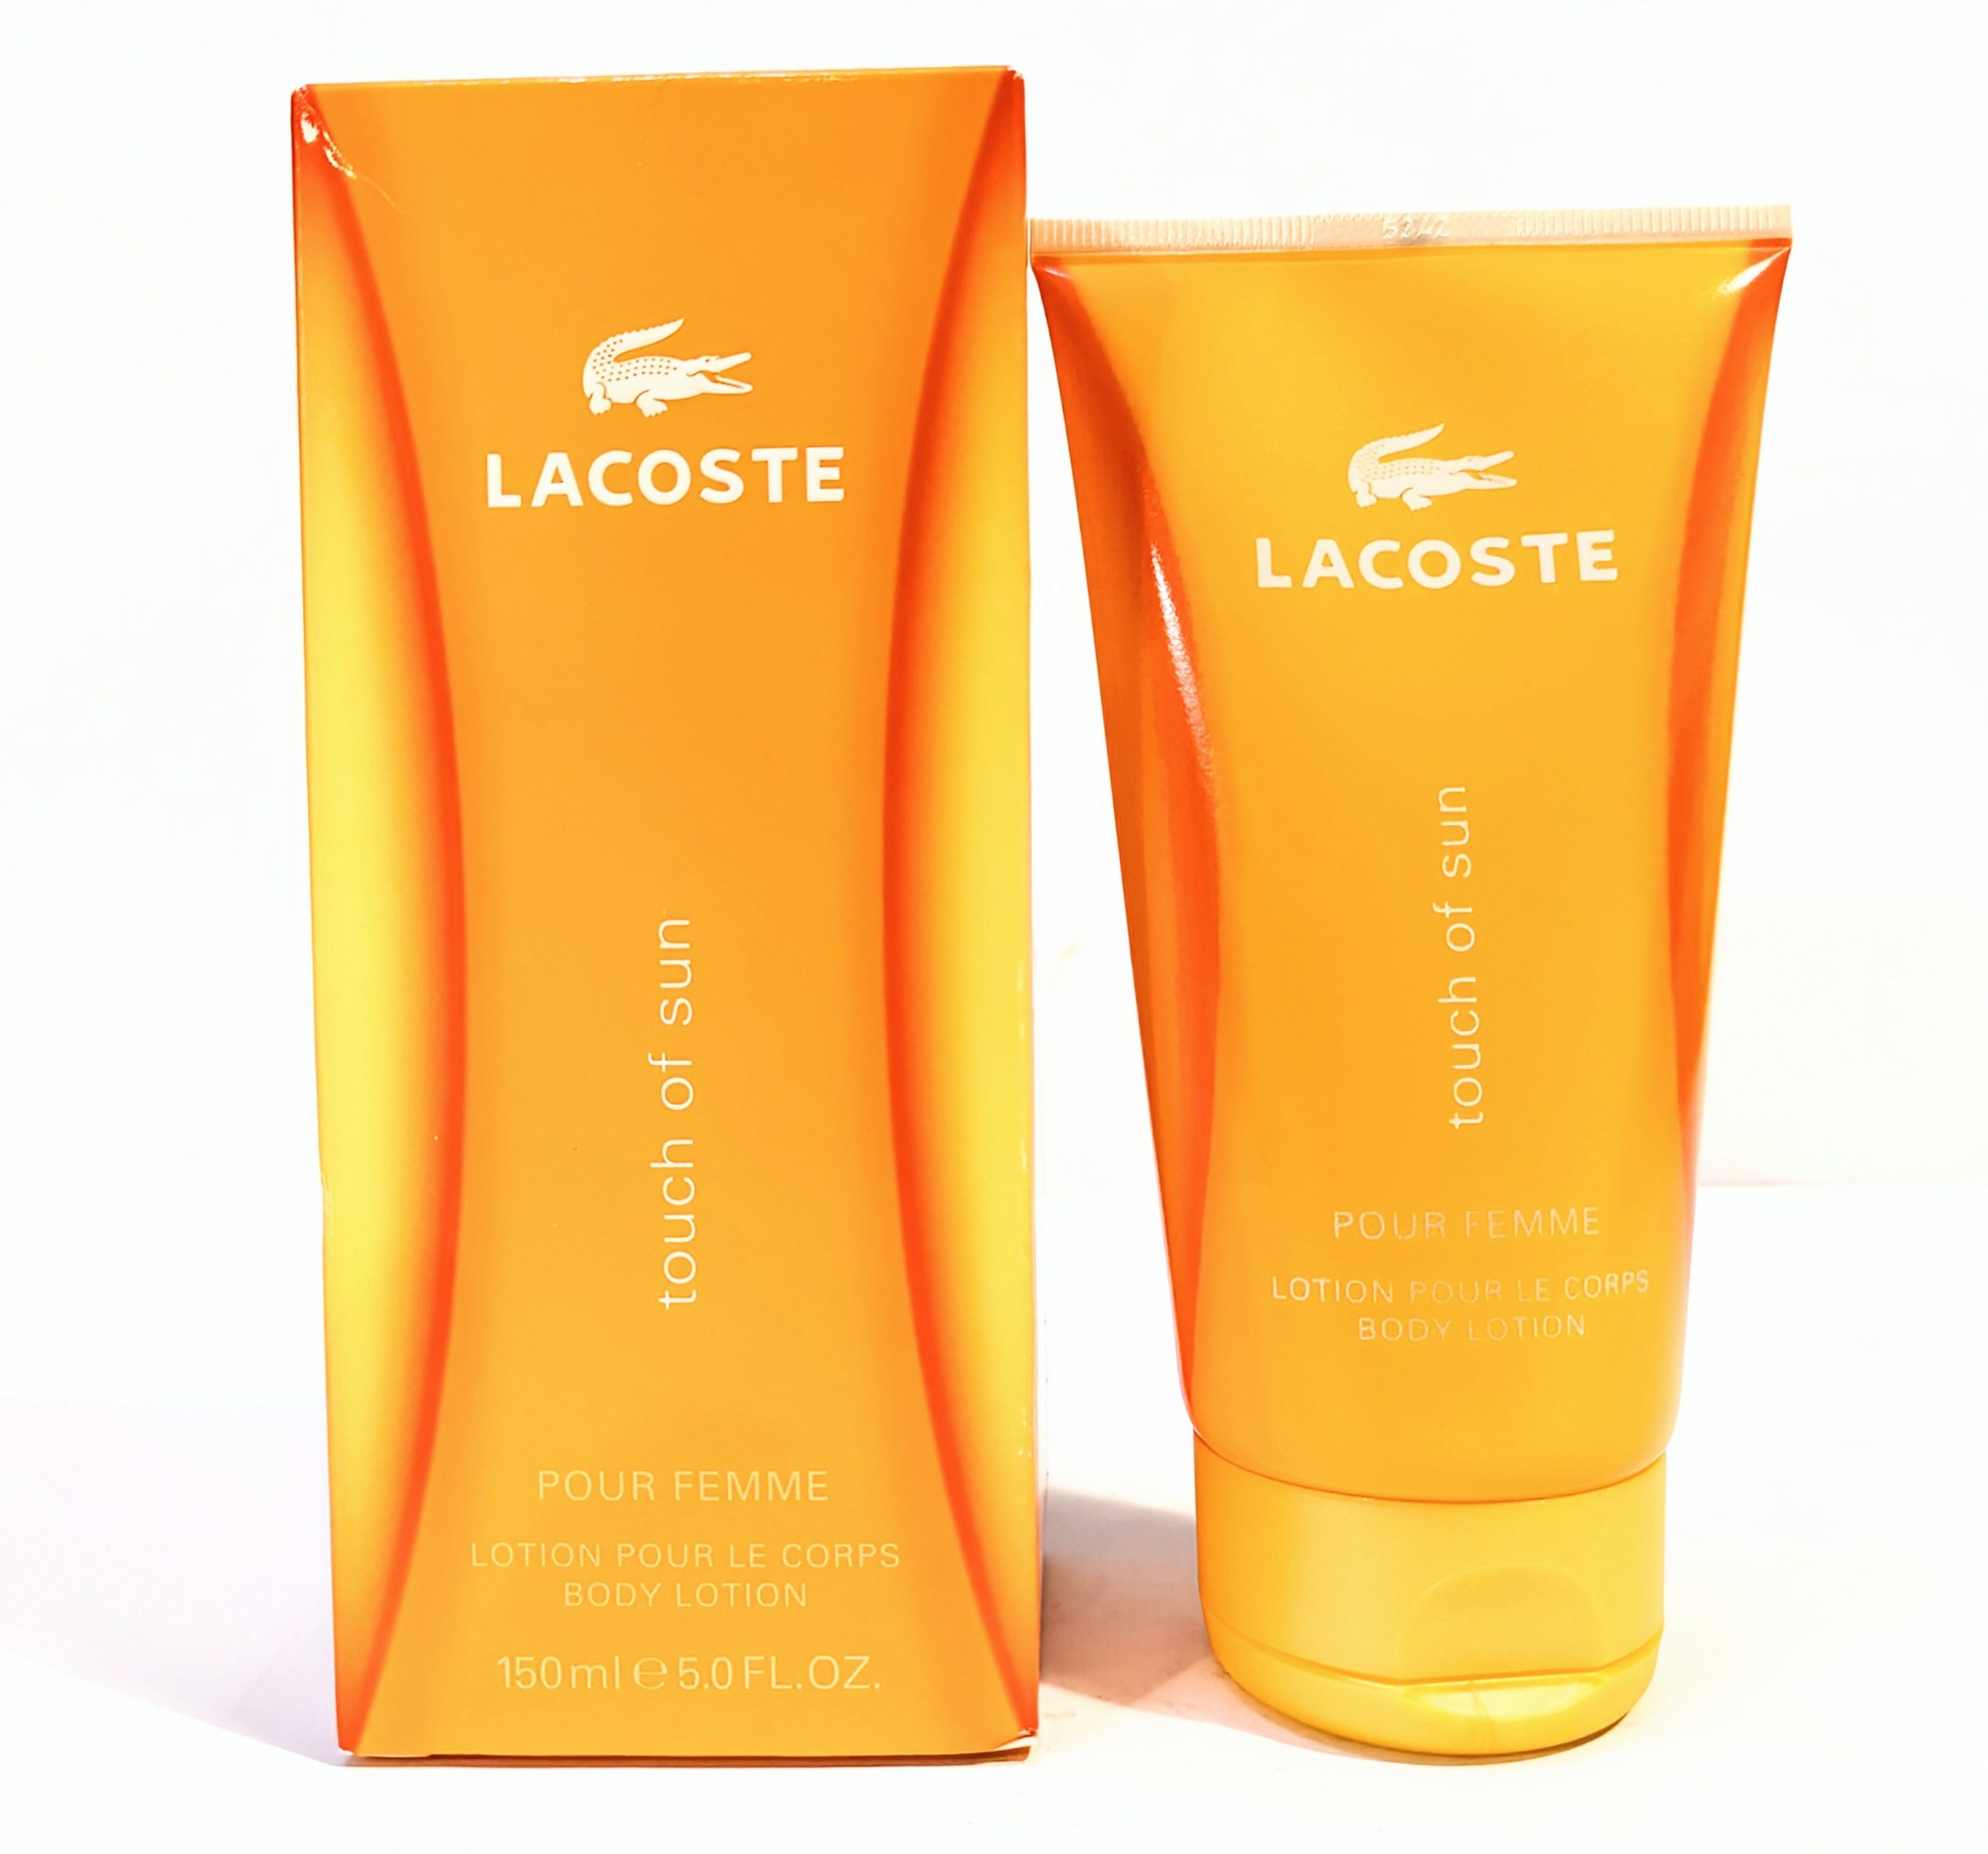 Lacoste “Touch of Sun” body lotion in a 150 ml orange tube, displayed with its matching orange box featuring the Lacoste logo and product name.